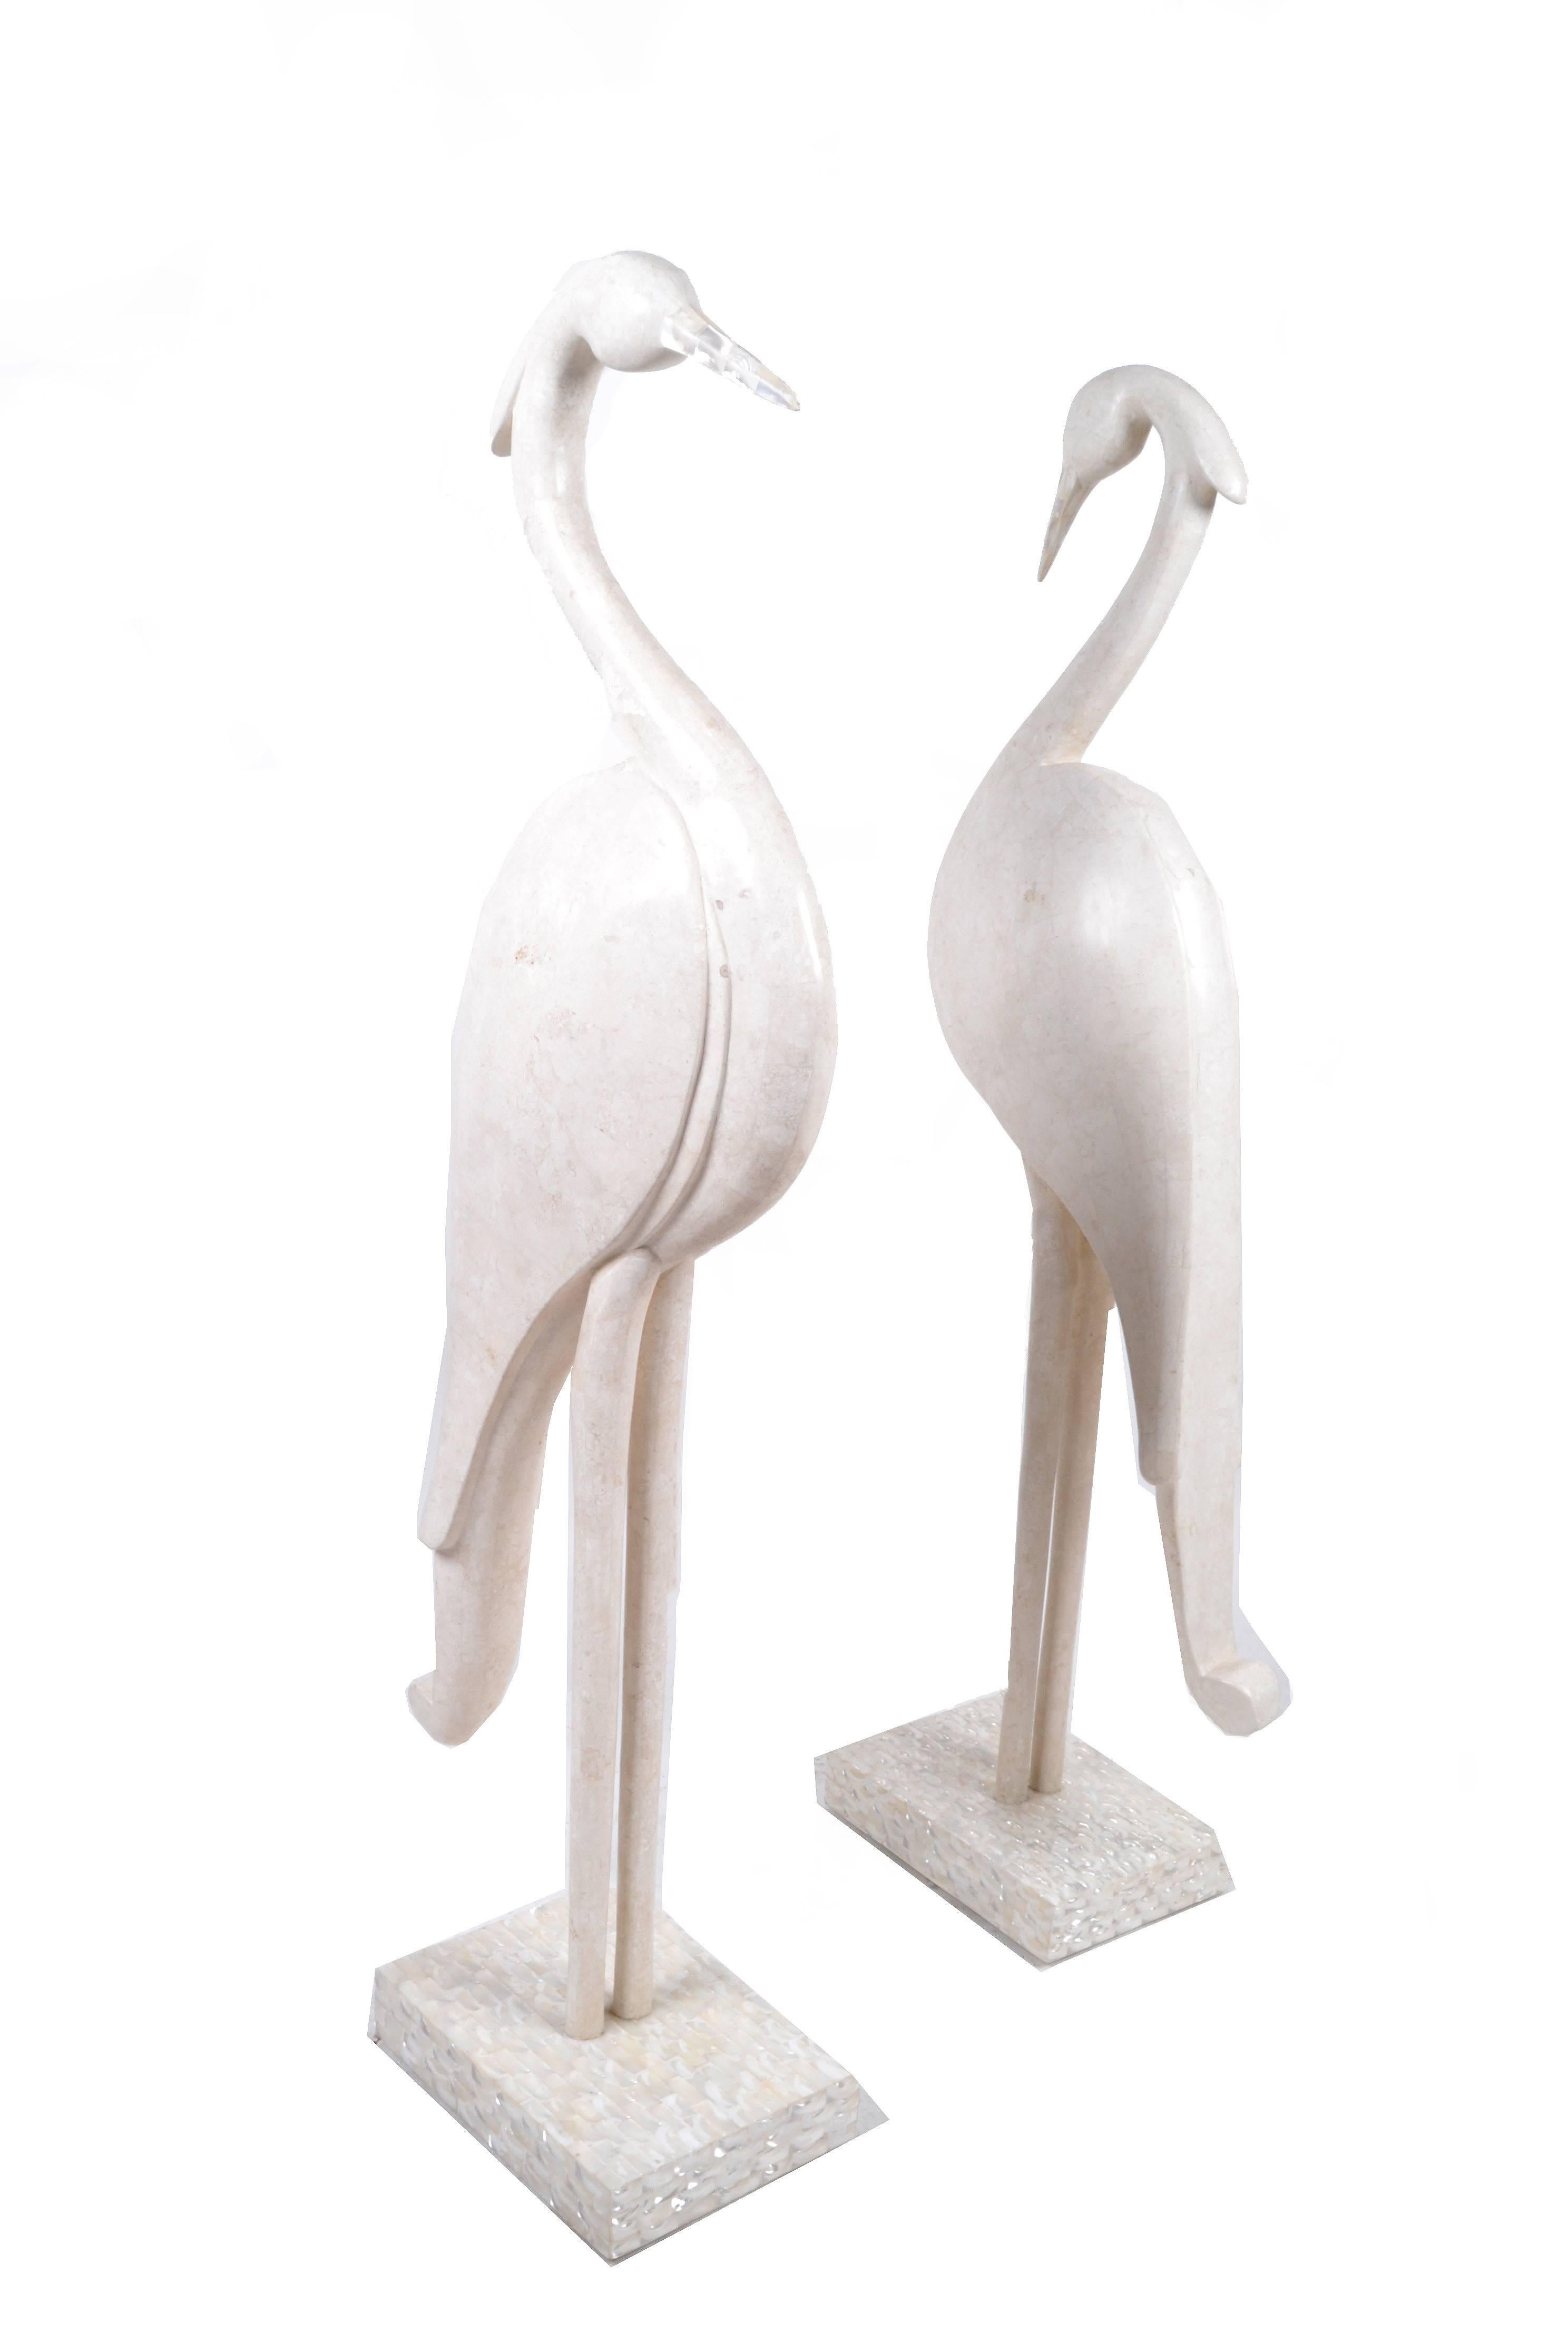 Elegant pair of birds in white ivory stone with beige fossil stone mounted on a square base.
The beaks as well as the bases are in mother-of-pearl.
Makers mark underneath, Marquis Collection of Beverly Hills.
In good vintage condition with normal